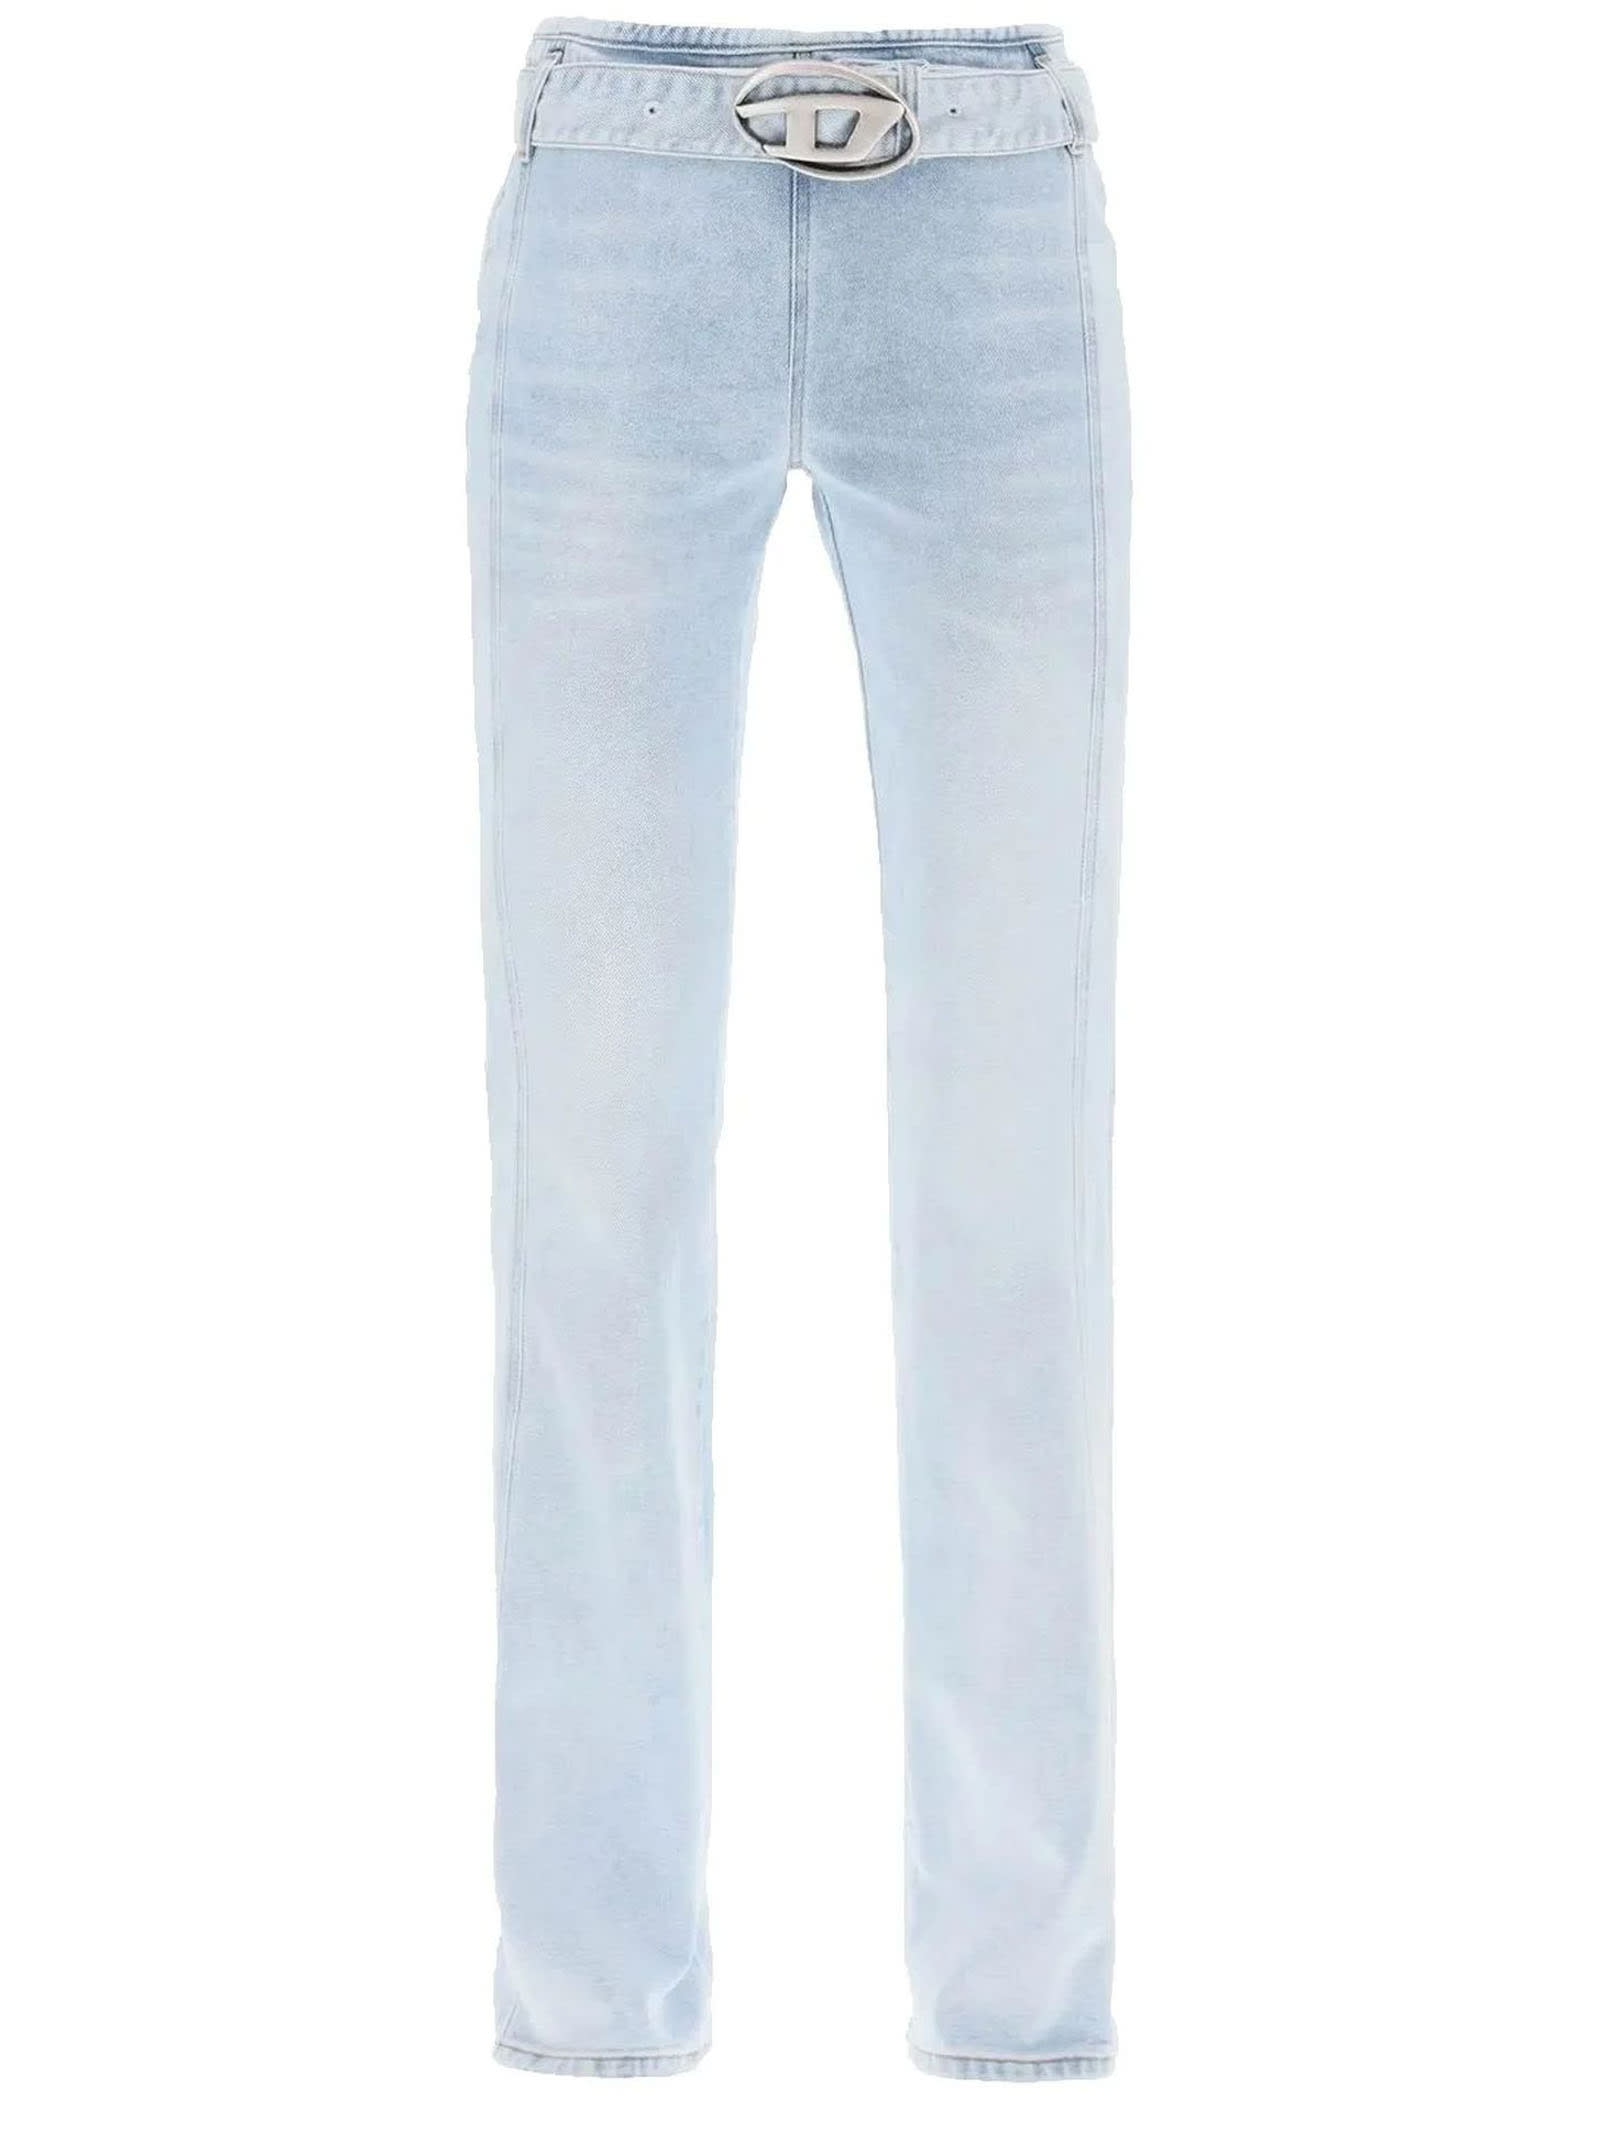 D-ebbey Belted Flared Jeans